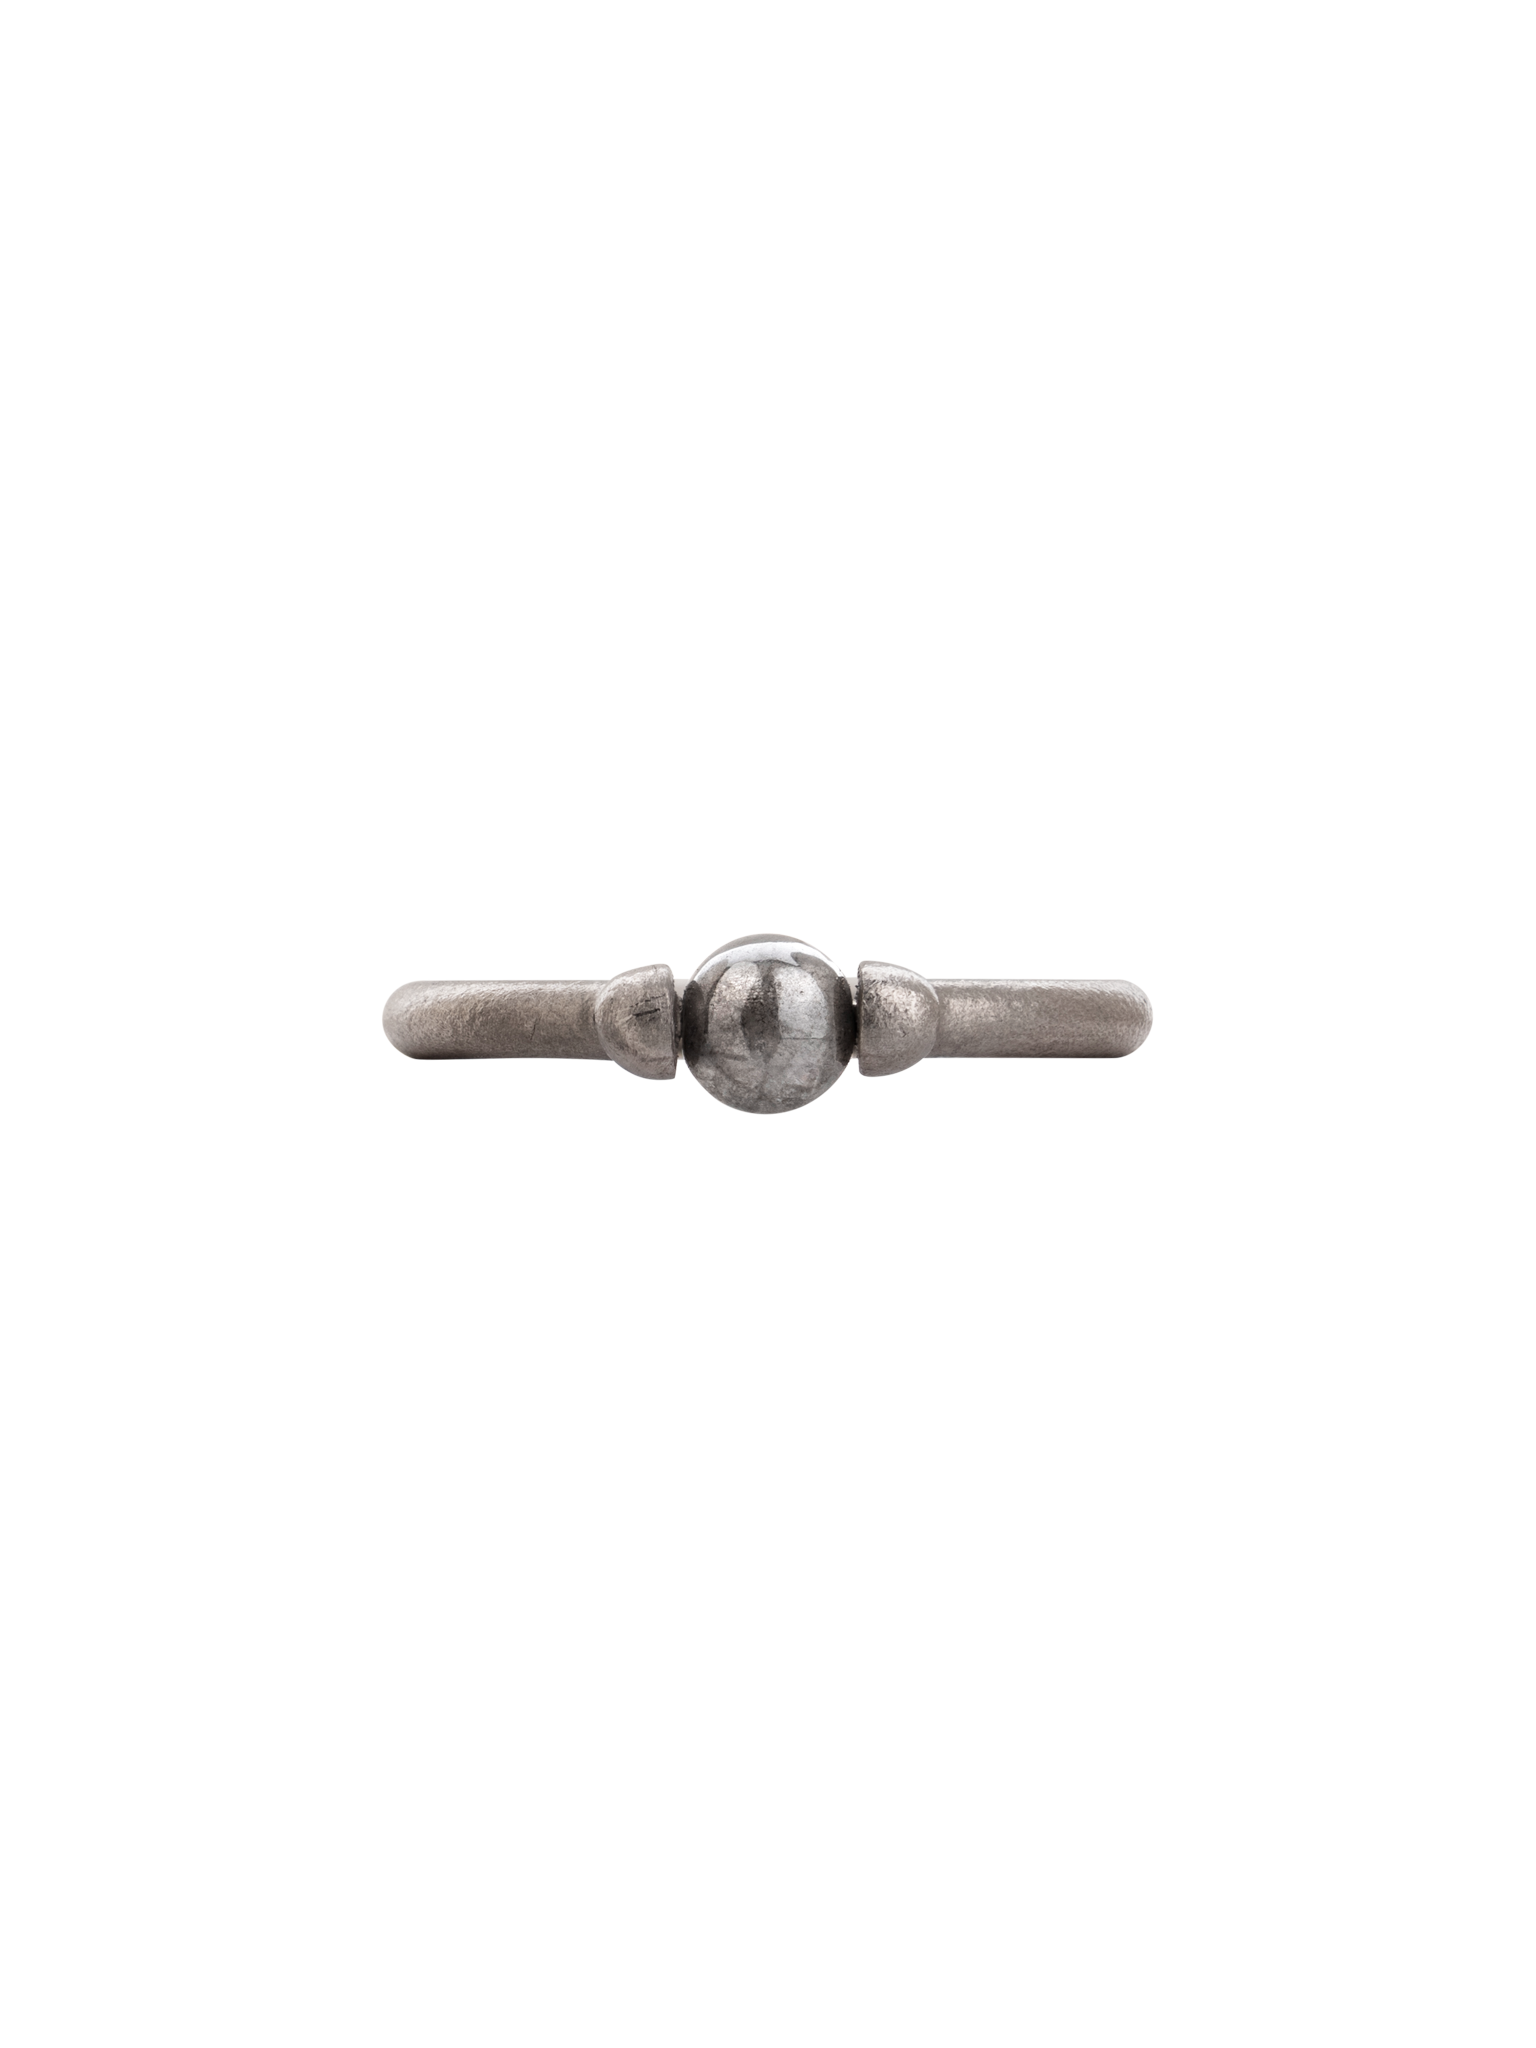 Abacus ring in white gold with diamond